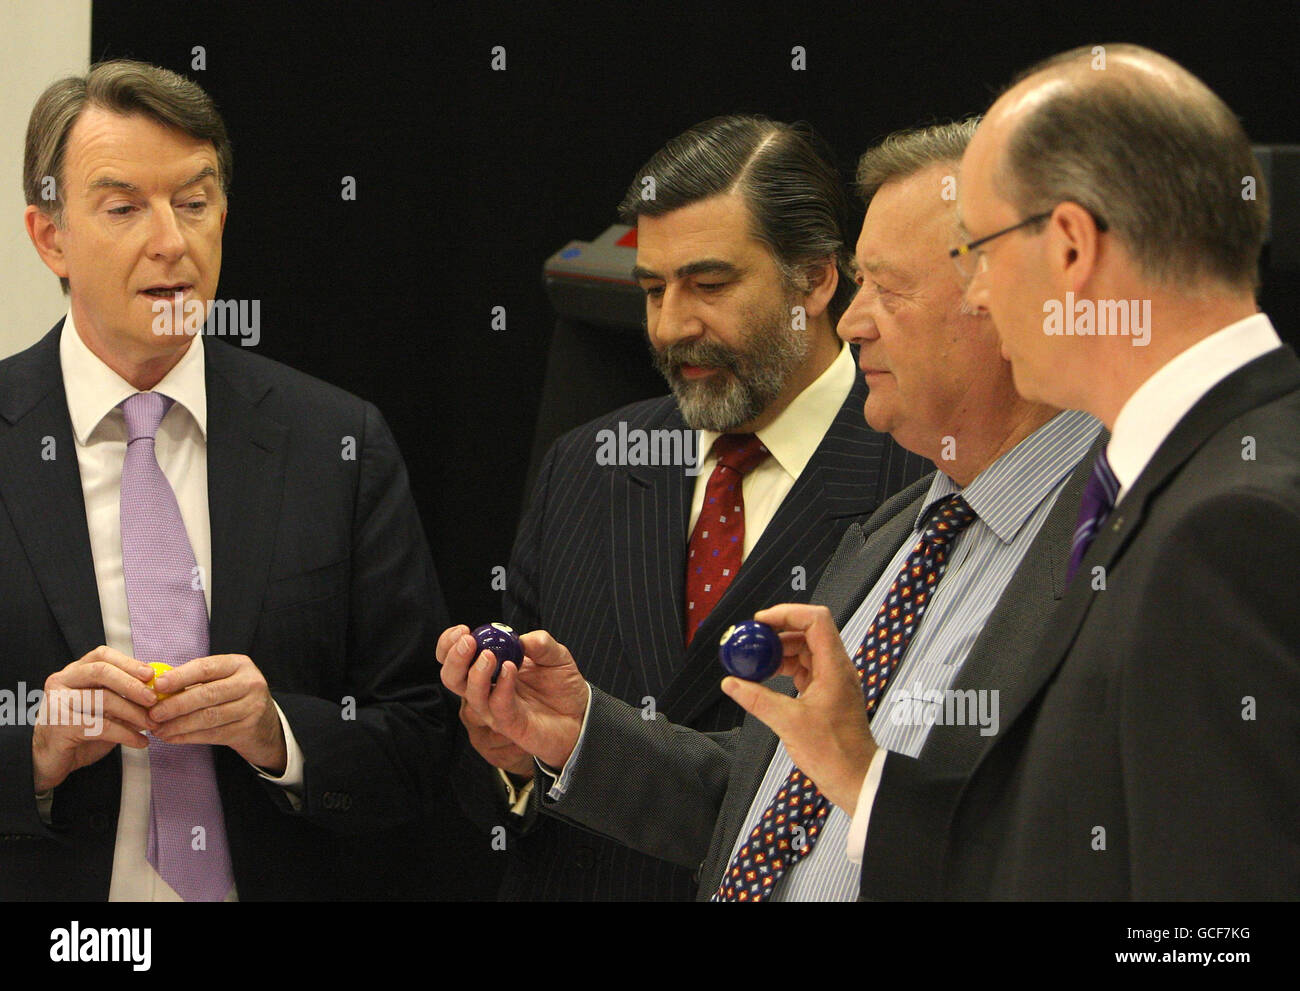 (Left to right) Business Secretary Lord Mandelson, Liberal Democrat Shadow Business Secretary John Thurso, Conservative Shadow Business Secretary Ken Clarke and Scottish National Party Business Secretary John Swinney draw lots to determine their order of appearance at a recording of BBC2's Election Daily Politics Debate, at Millbank Studios, in Westminster, London. Stock Photo